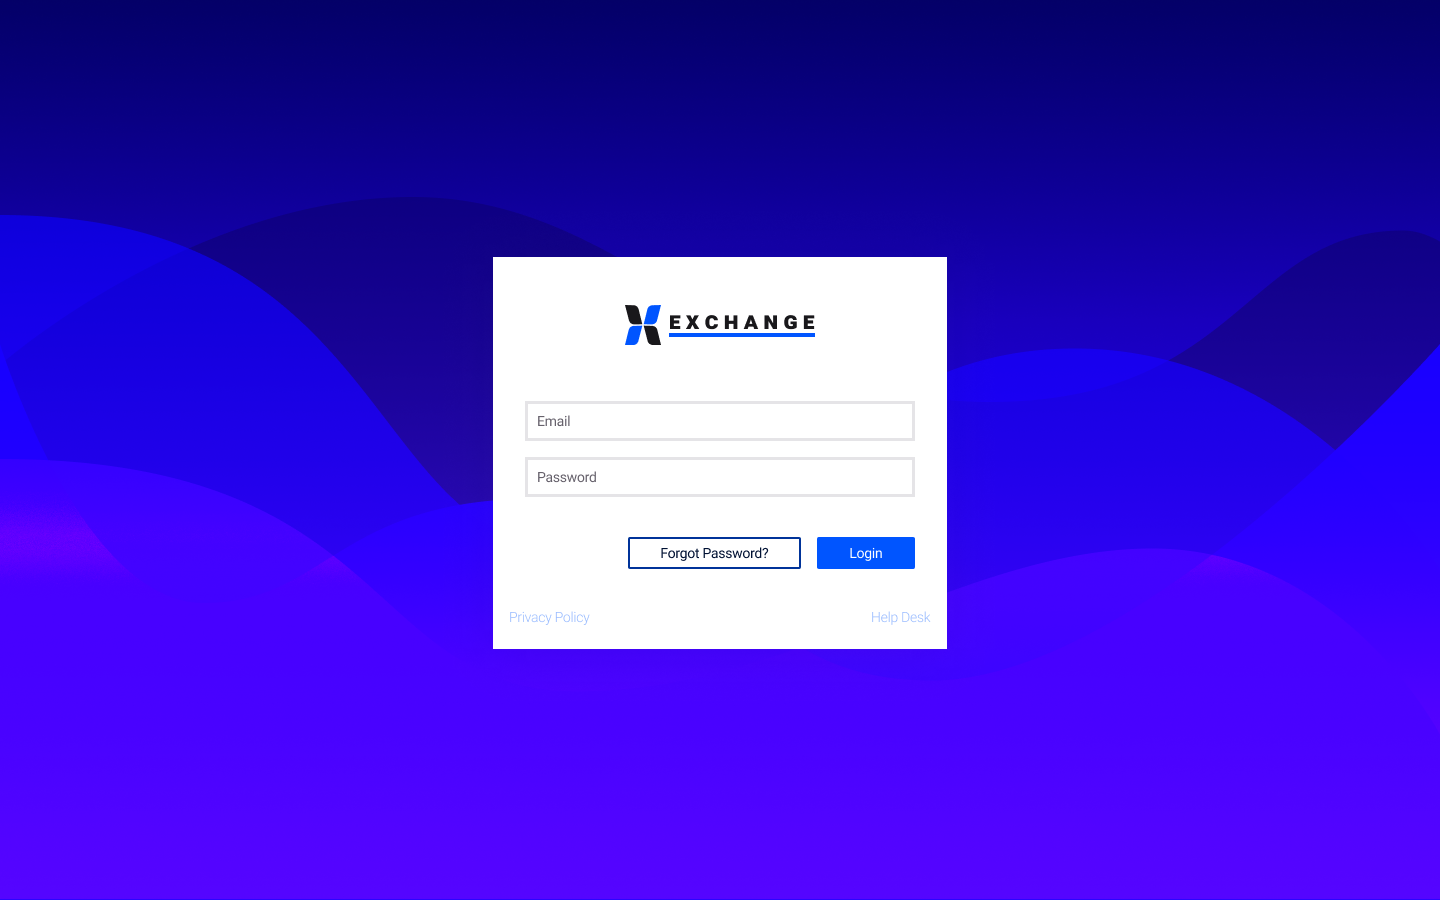 The Login Page to the Exchange Platform